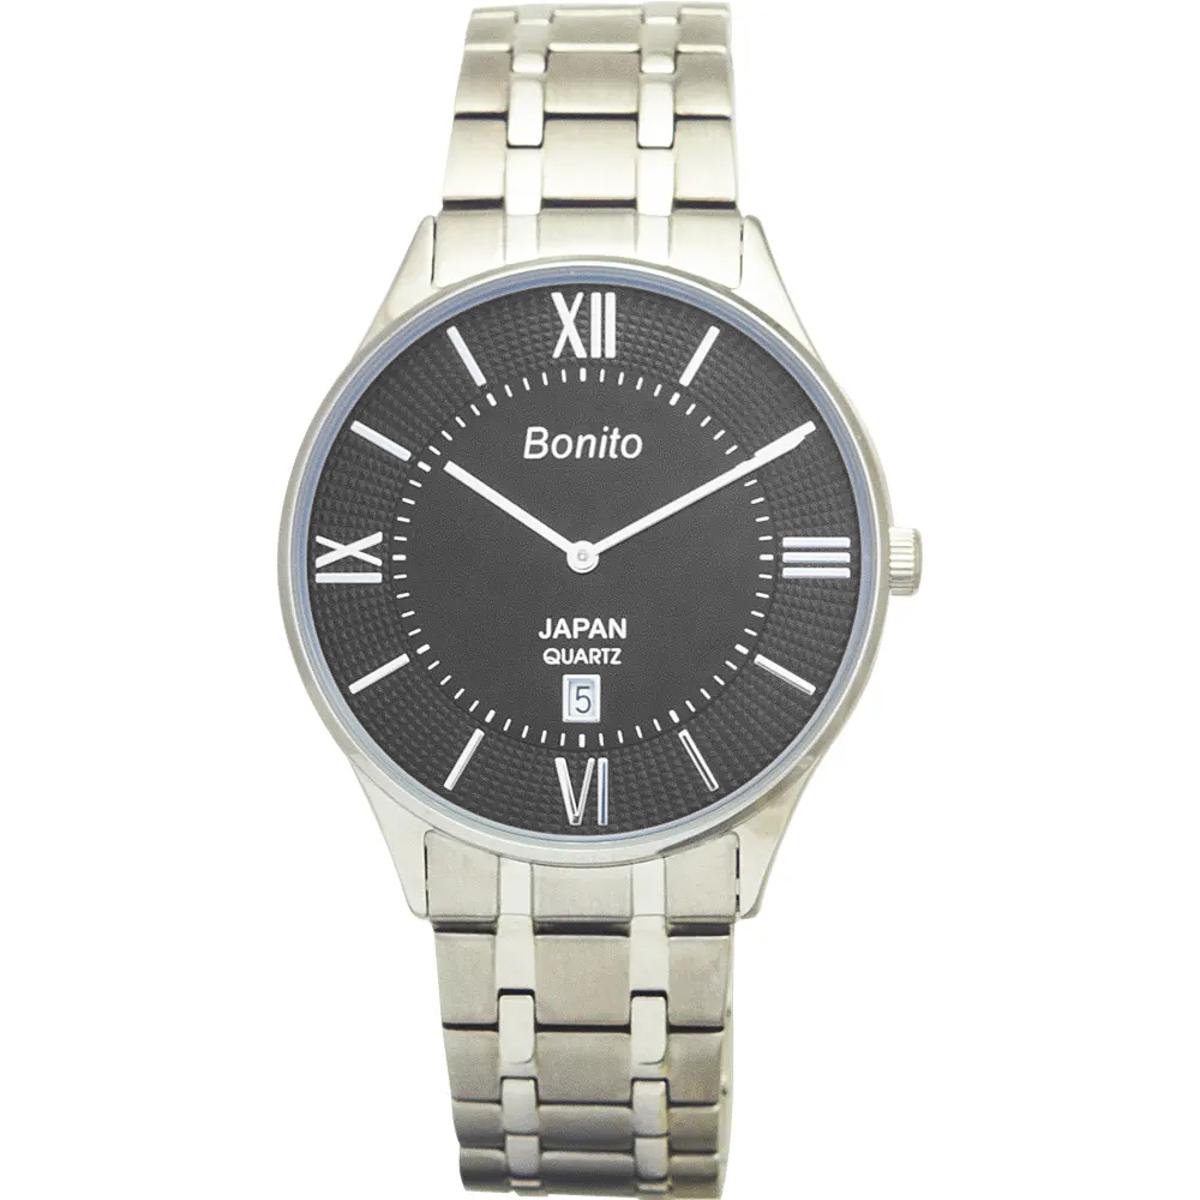 Bonito Watches New Models | Original Bonito Watches Prices In Pakistan |  Pakistan, watch, stainless steel | K5146 Bonito men's wrist watch in  stainless steel silver/gold combination bracelet & case, black dial